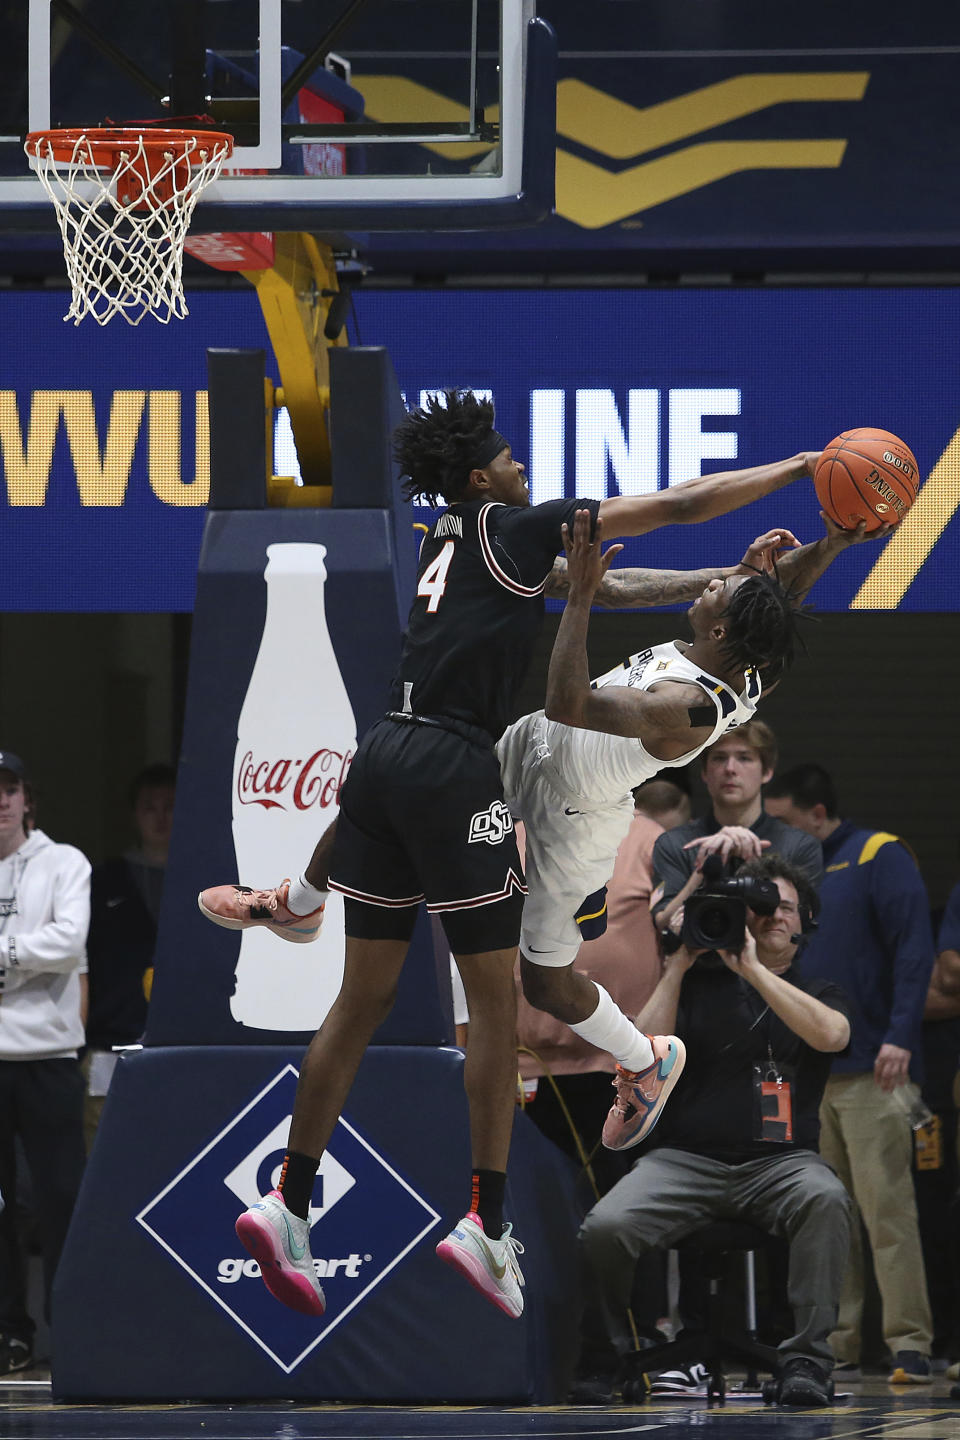 West Virginia guard Kedrian Johnson, right, is defended by Oklahoma State guard Woody Newton (4) during the first half of an NCAA college basketball game on Monday, Feb. 20, 2023, in Morgantown, W.Va. (AP Photo/Kathleen Batten)